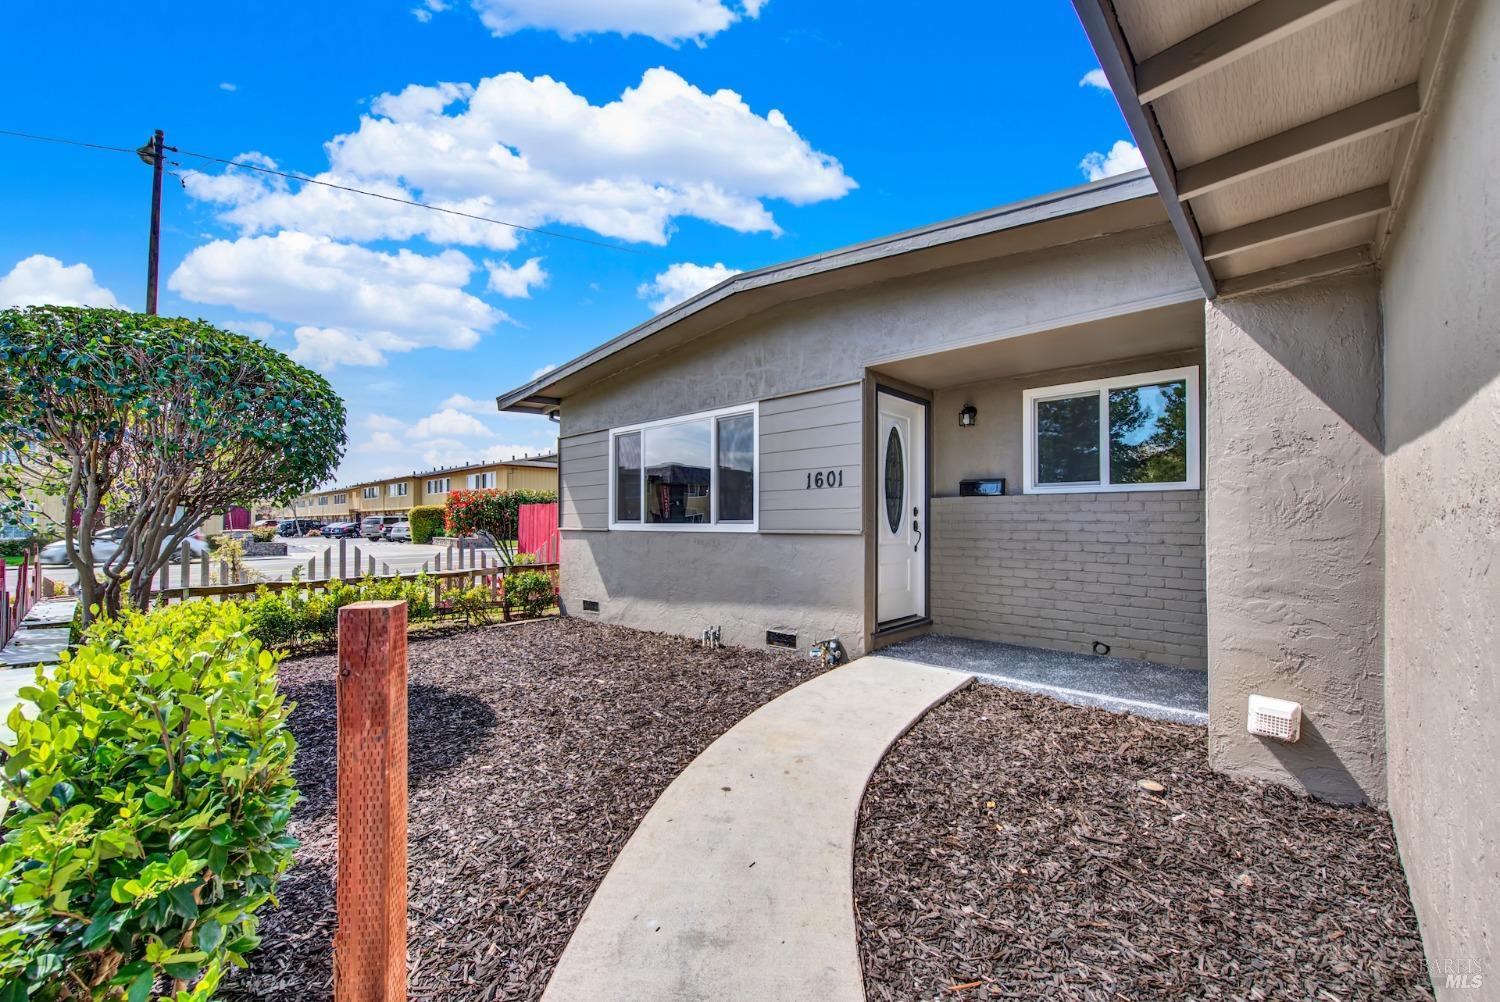 Beautifully renovated 3 bedroom home with park views ready for new owner & new memories!  Welcome ho